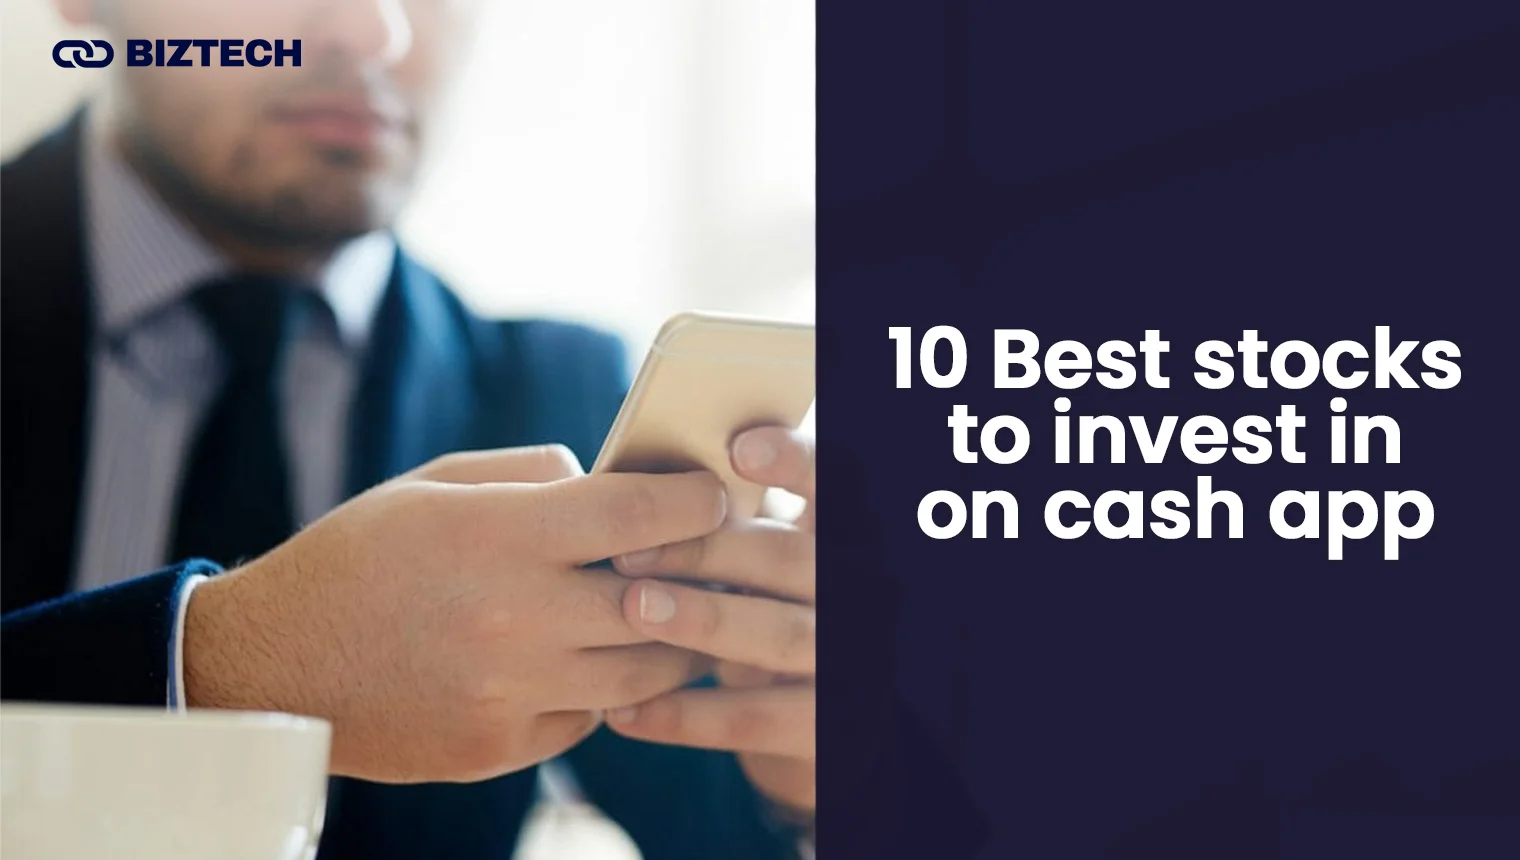 10 Best stocks to invest in on cash app